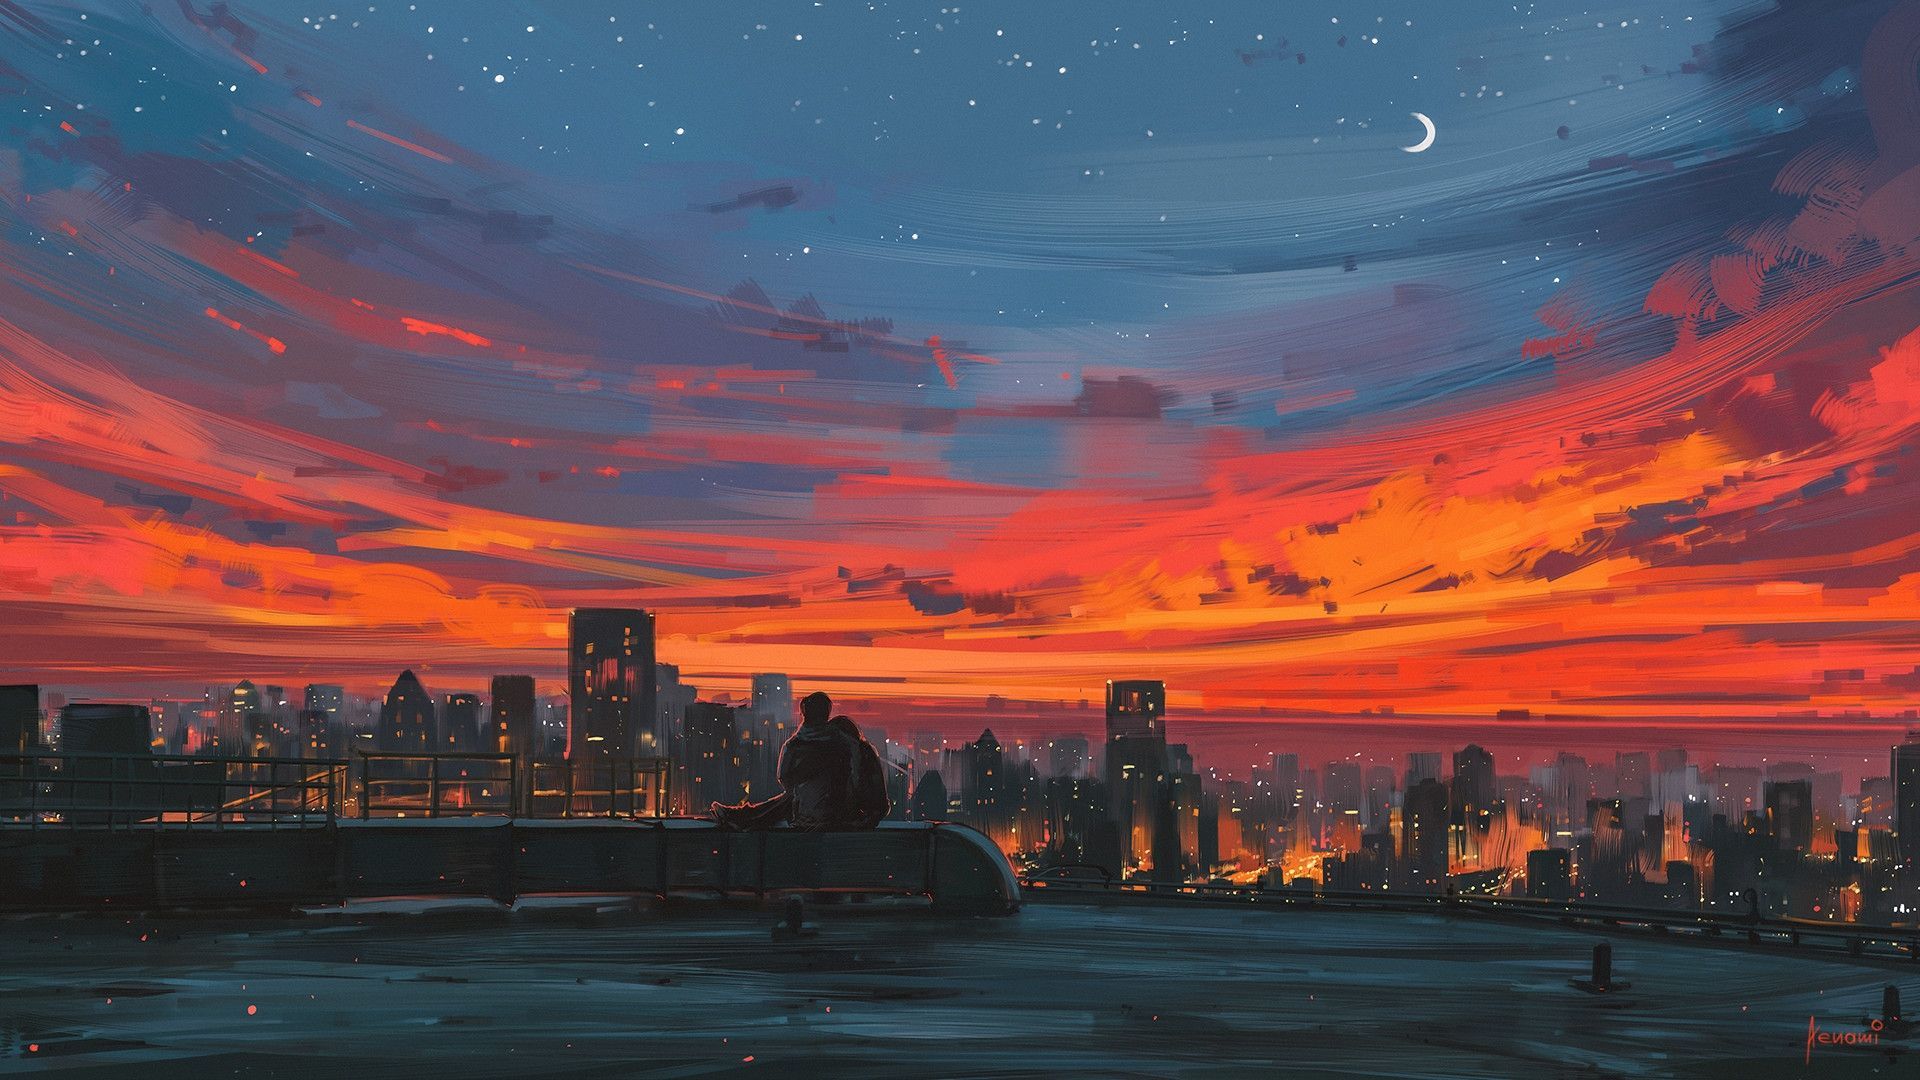 A painting of the city at sunset - 1920x1080